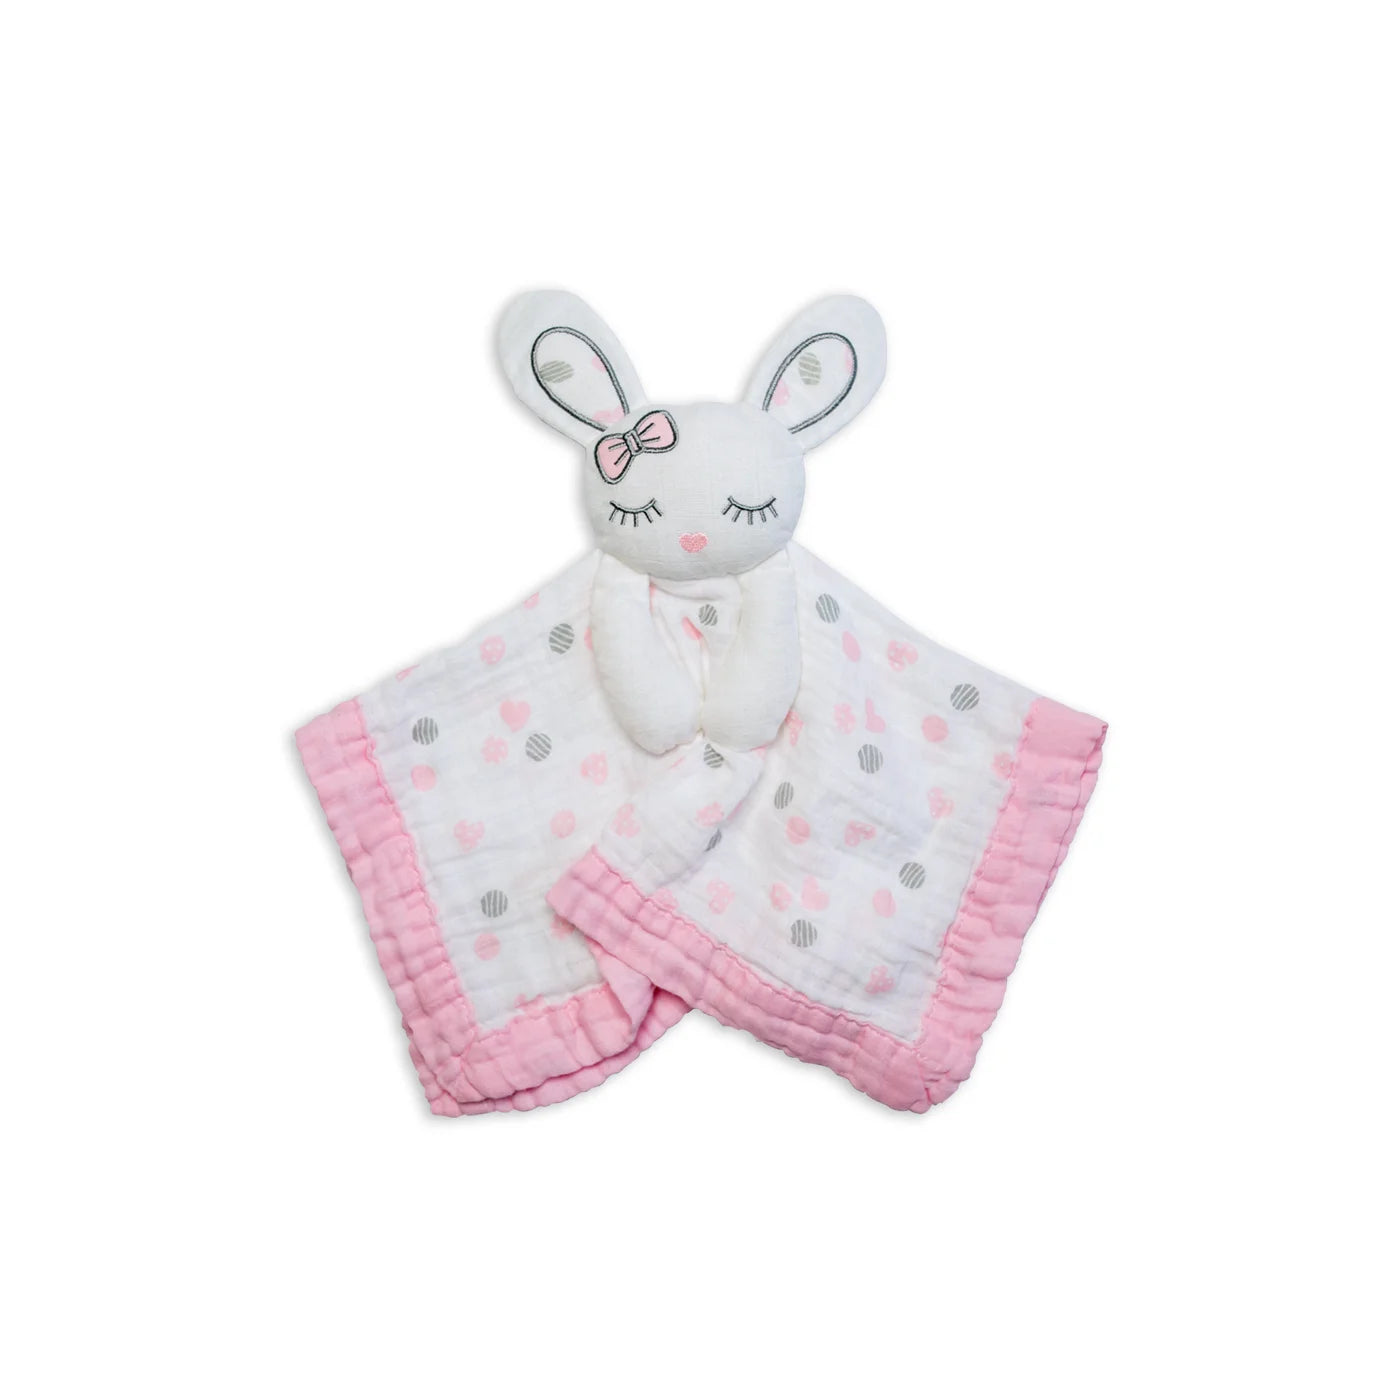 Baby Lovey - Cotton Muslin Pink Bunny